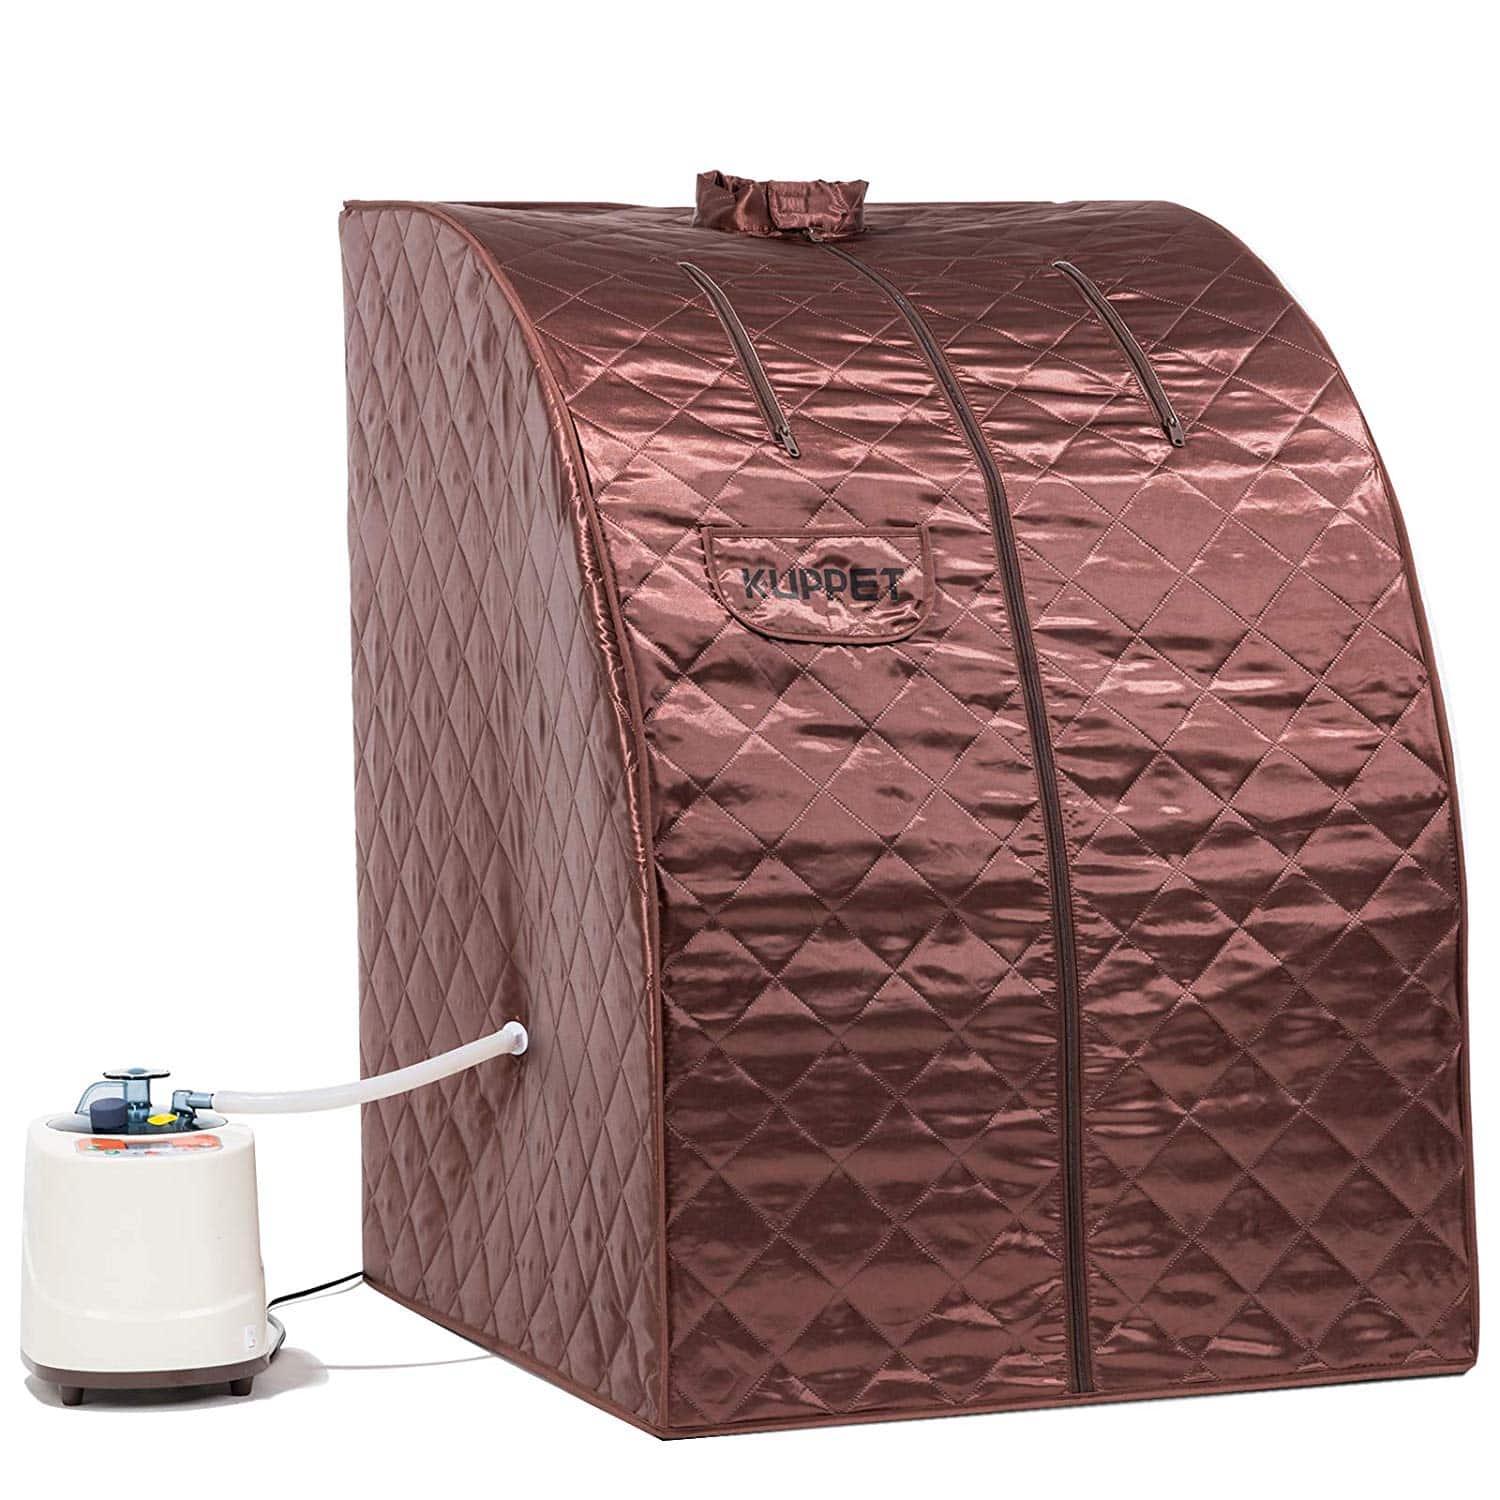 Top 10 Best Portable Sauna for Home in 2021 Reviews | Buyer's Guide